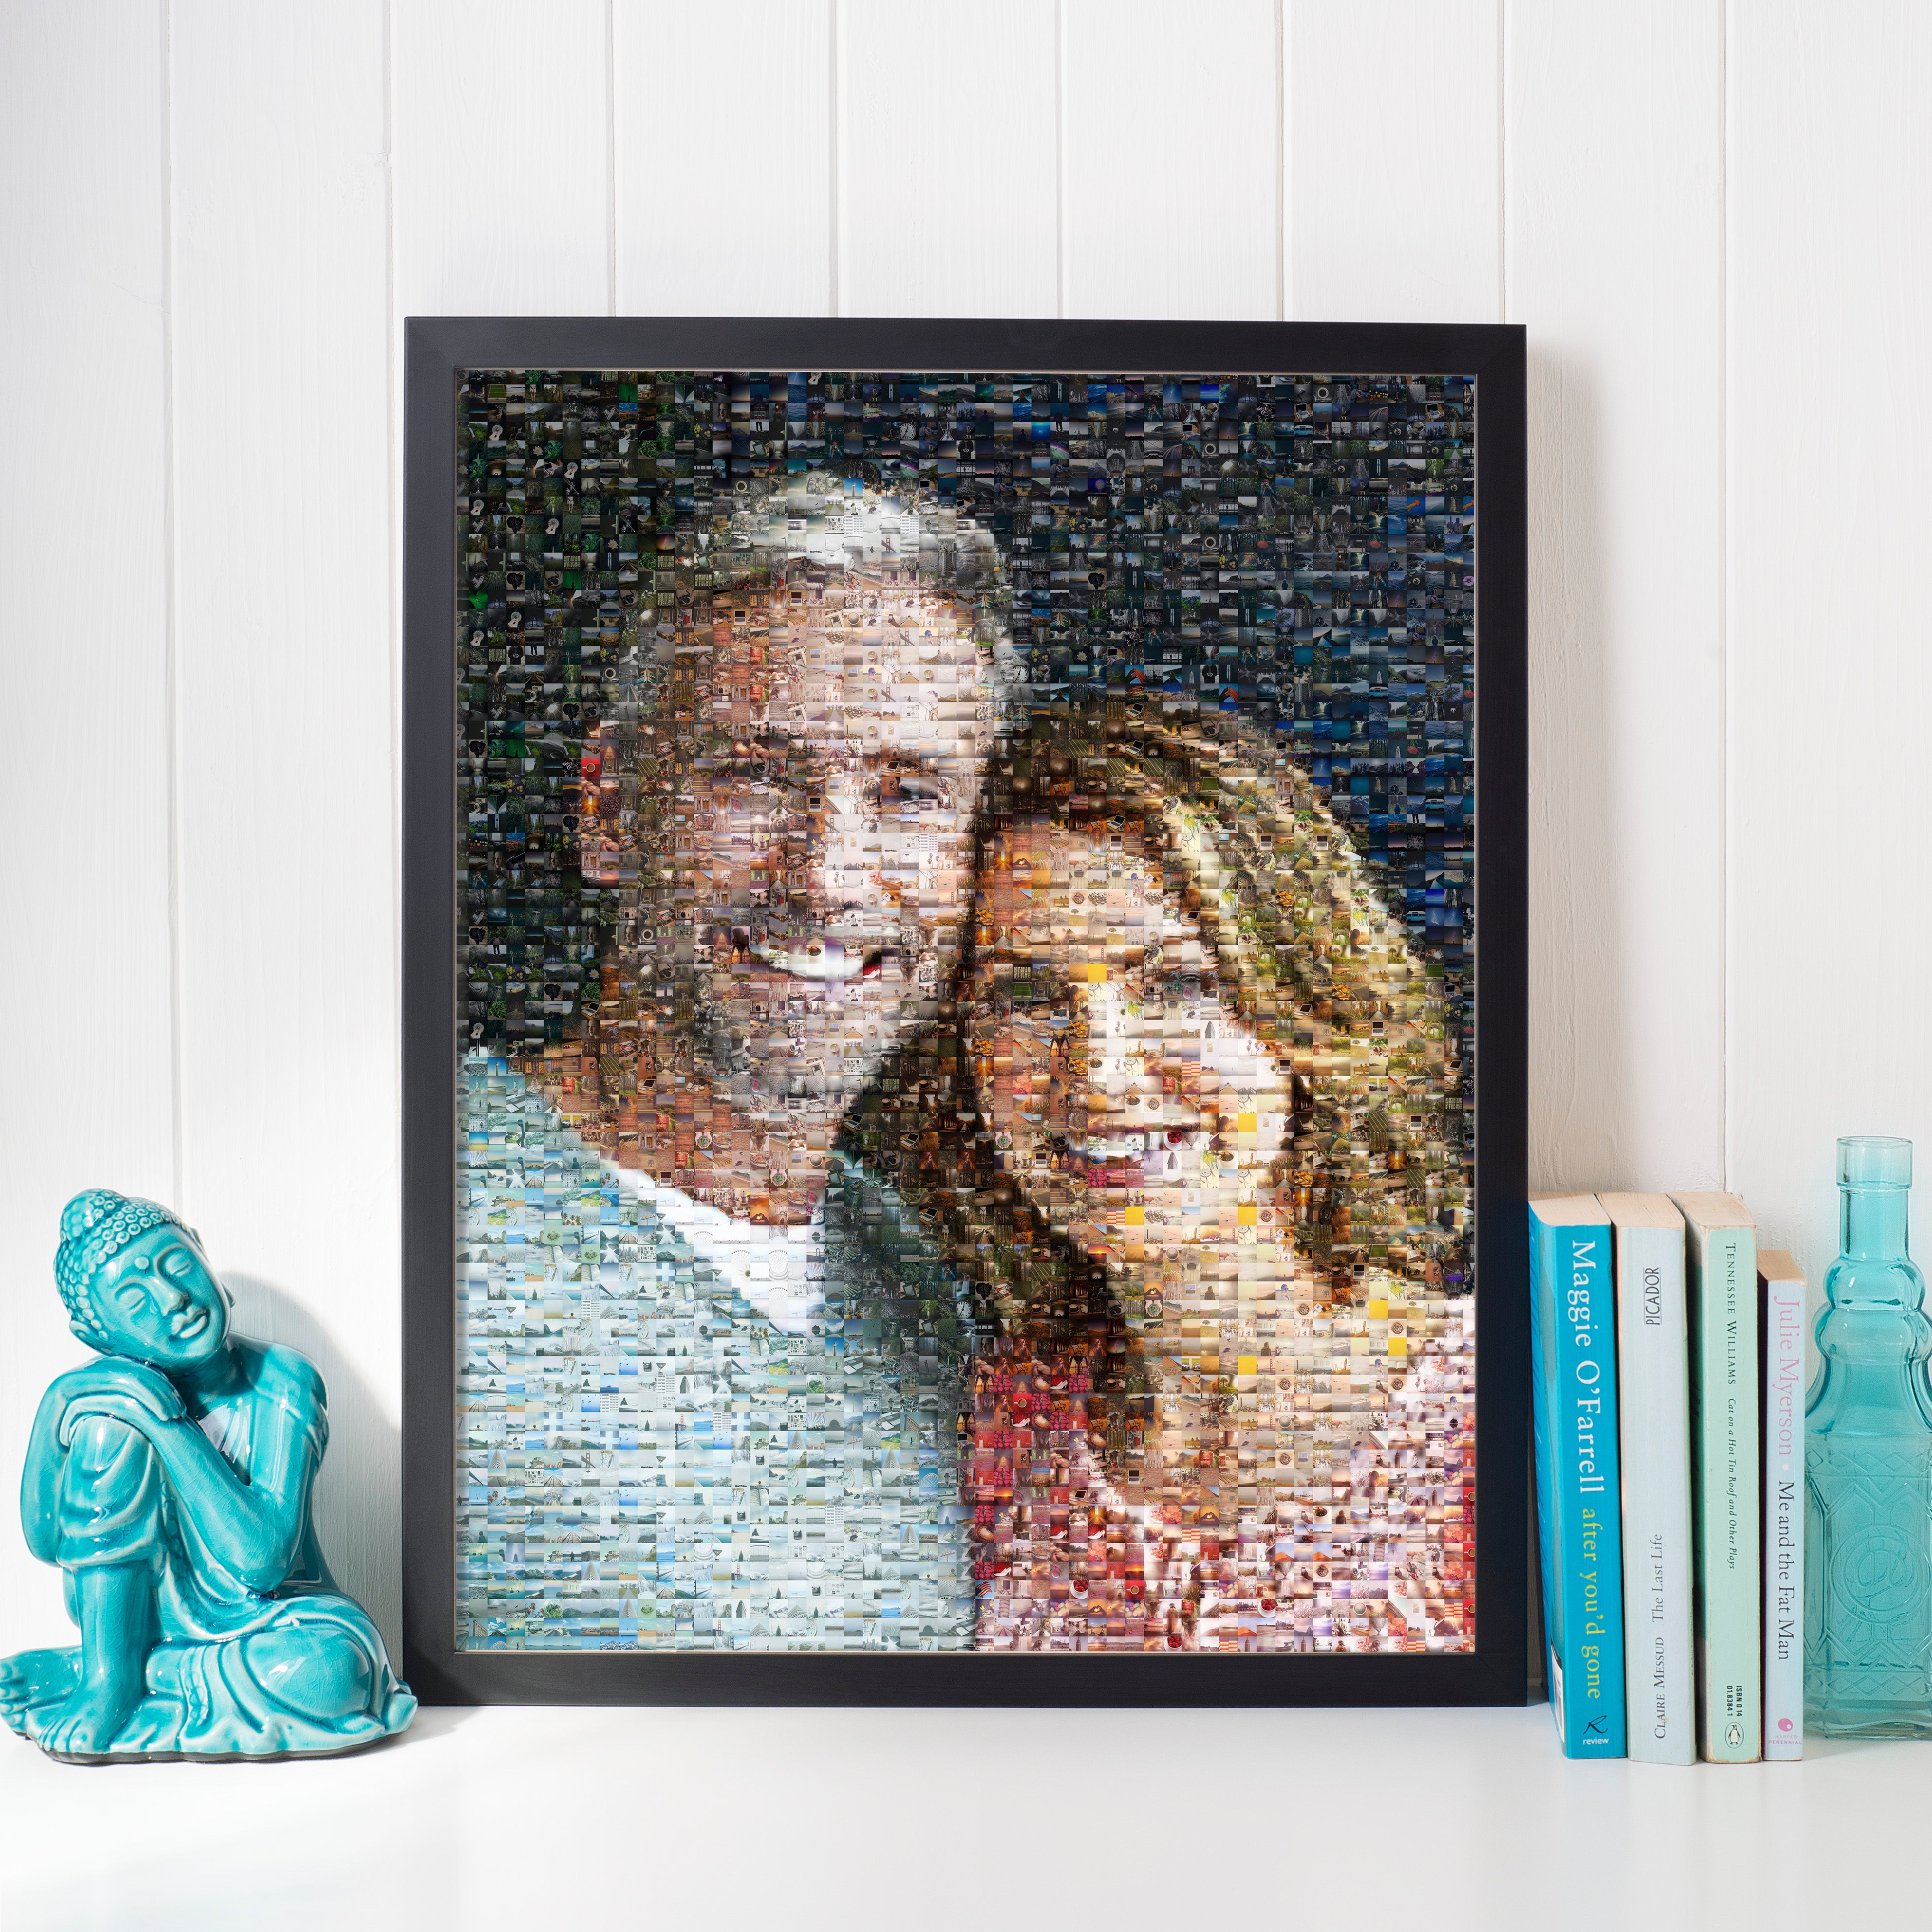 Photo Mosaic Frame Size 12×18 Inches – Moments of Love